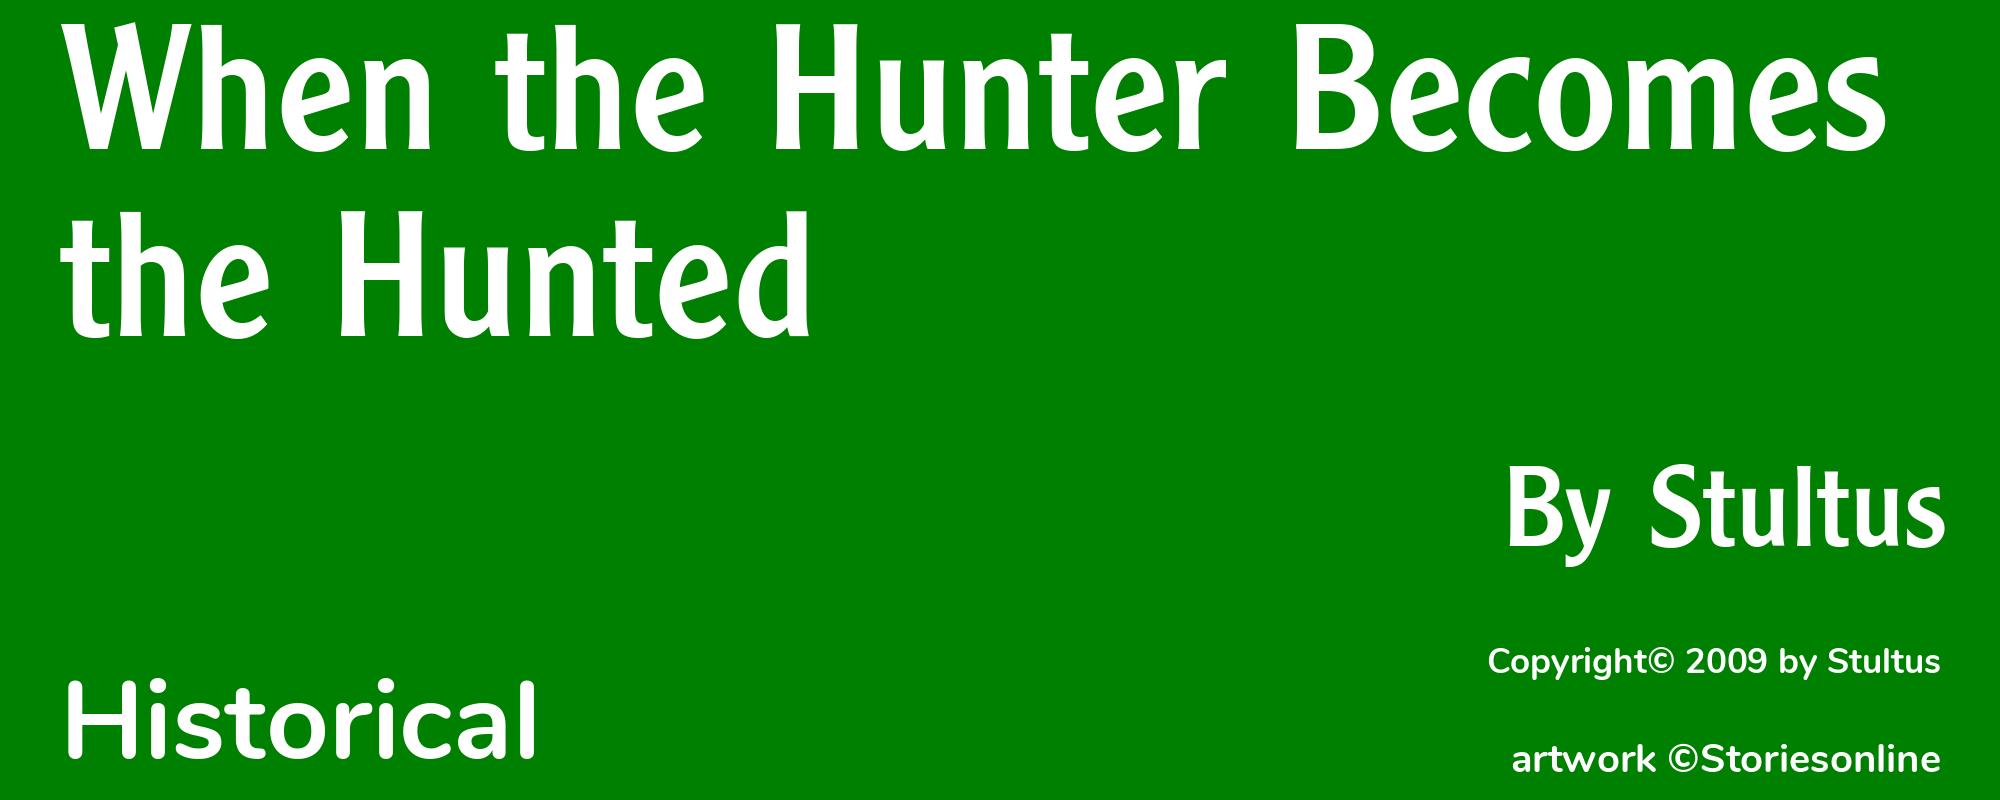 When the Hunter Becomes the Hunted - Cover